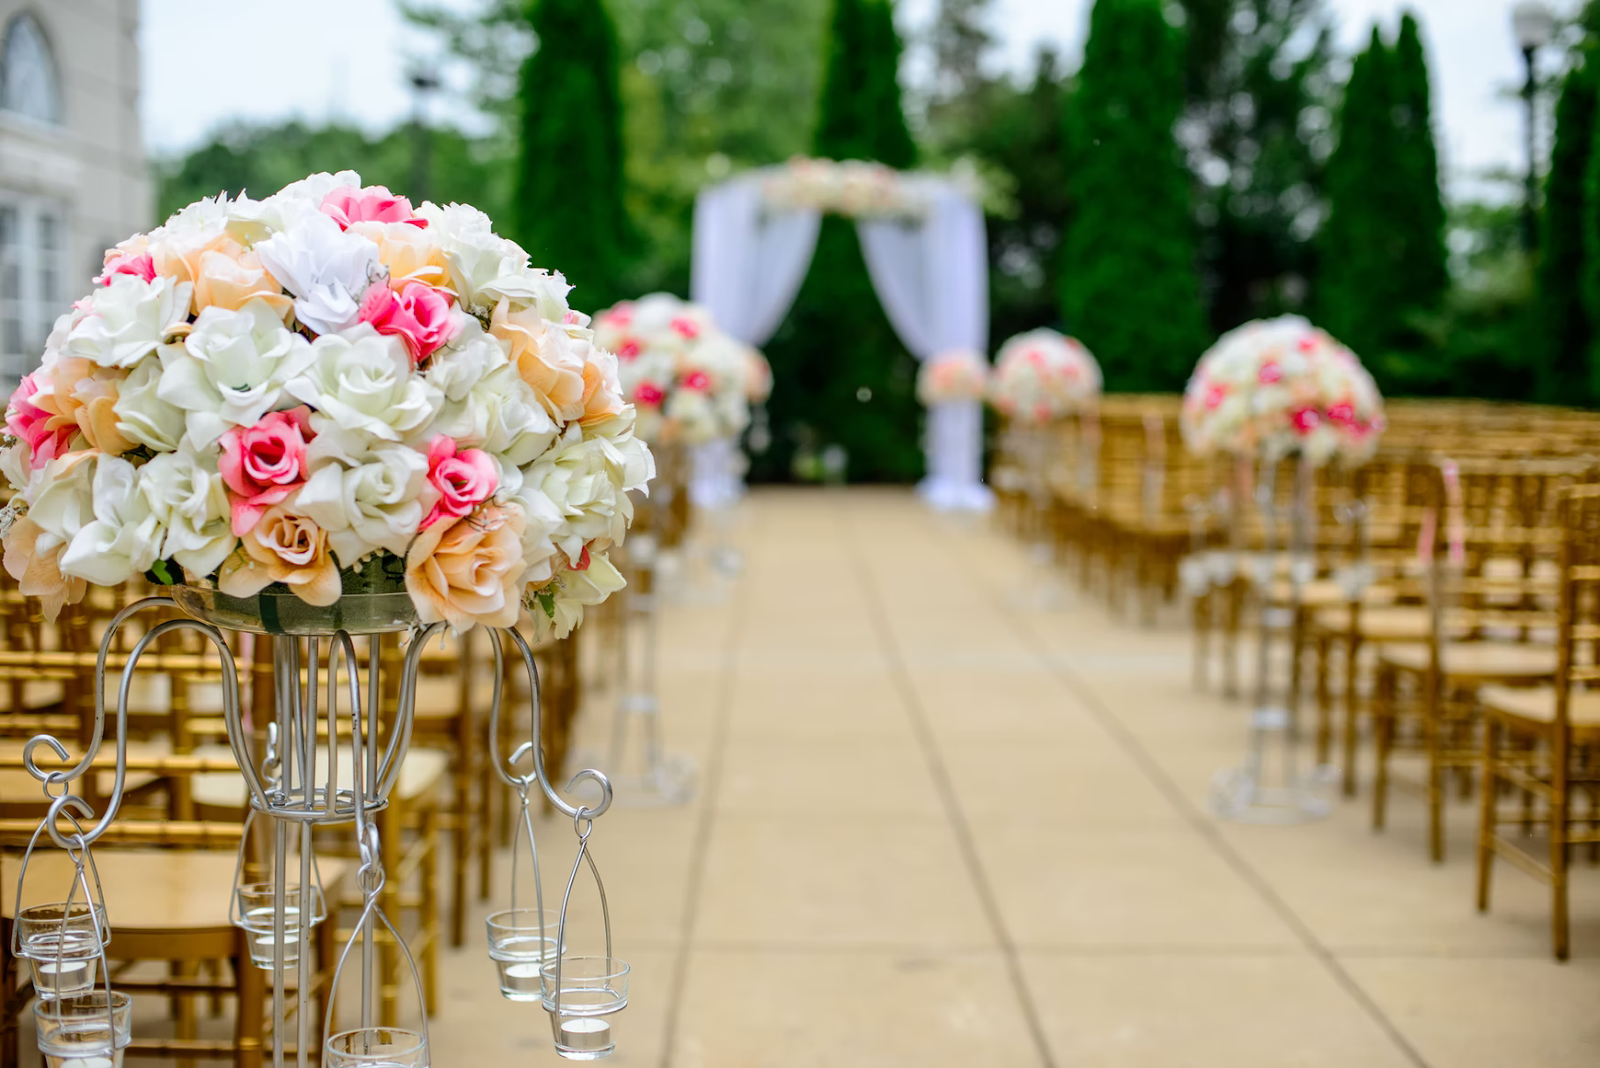 How to use Social Media To Market Your Wedding Venue